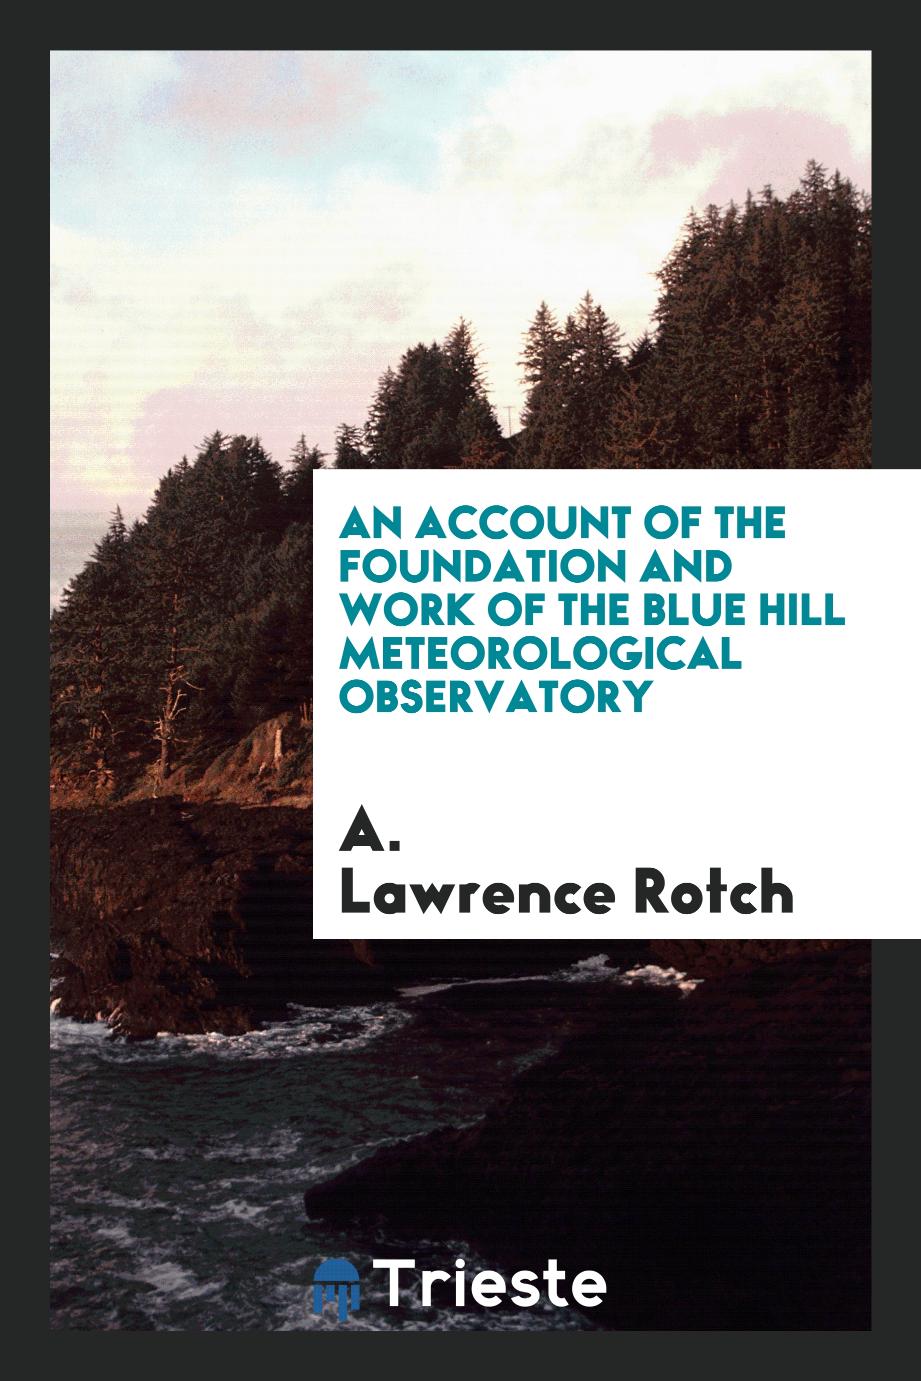 An account of the foundation and work of the Blue Hill Meteorological Observatory